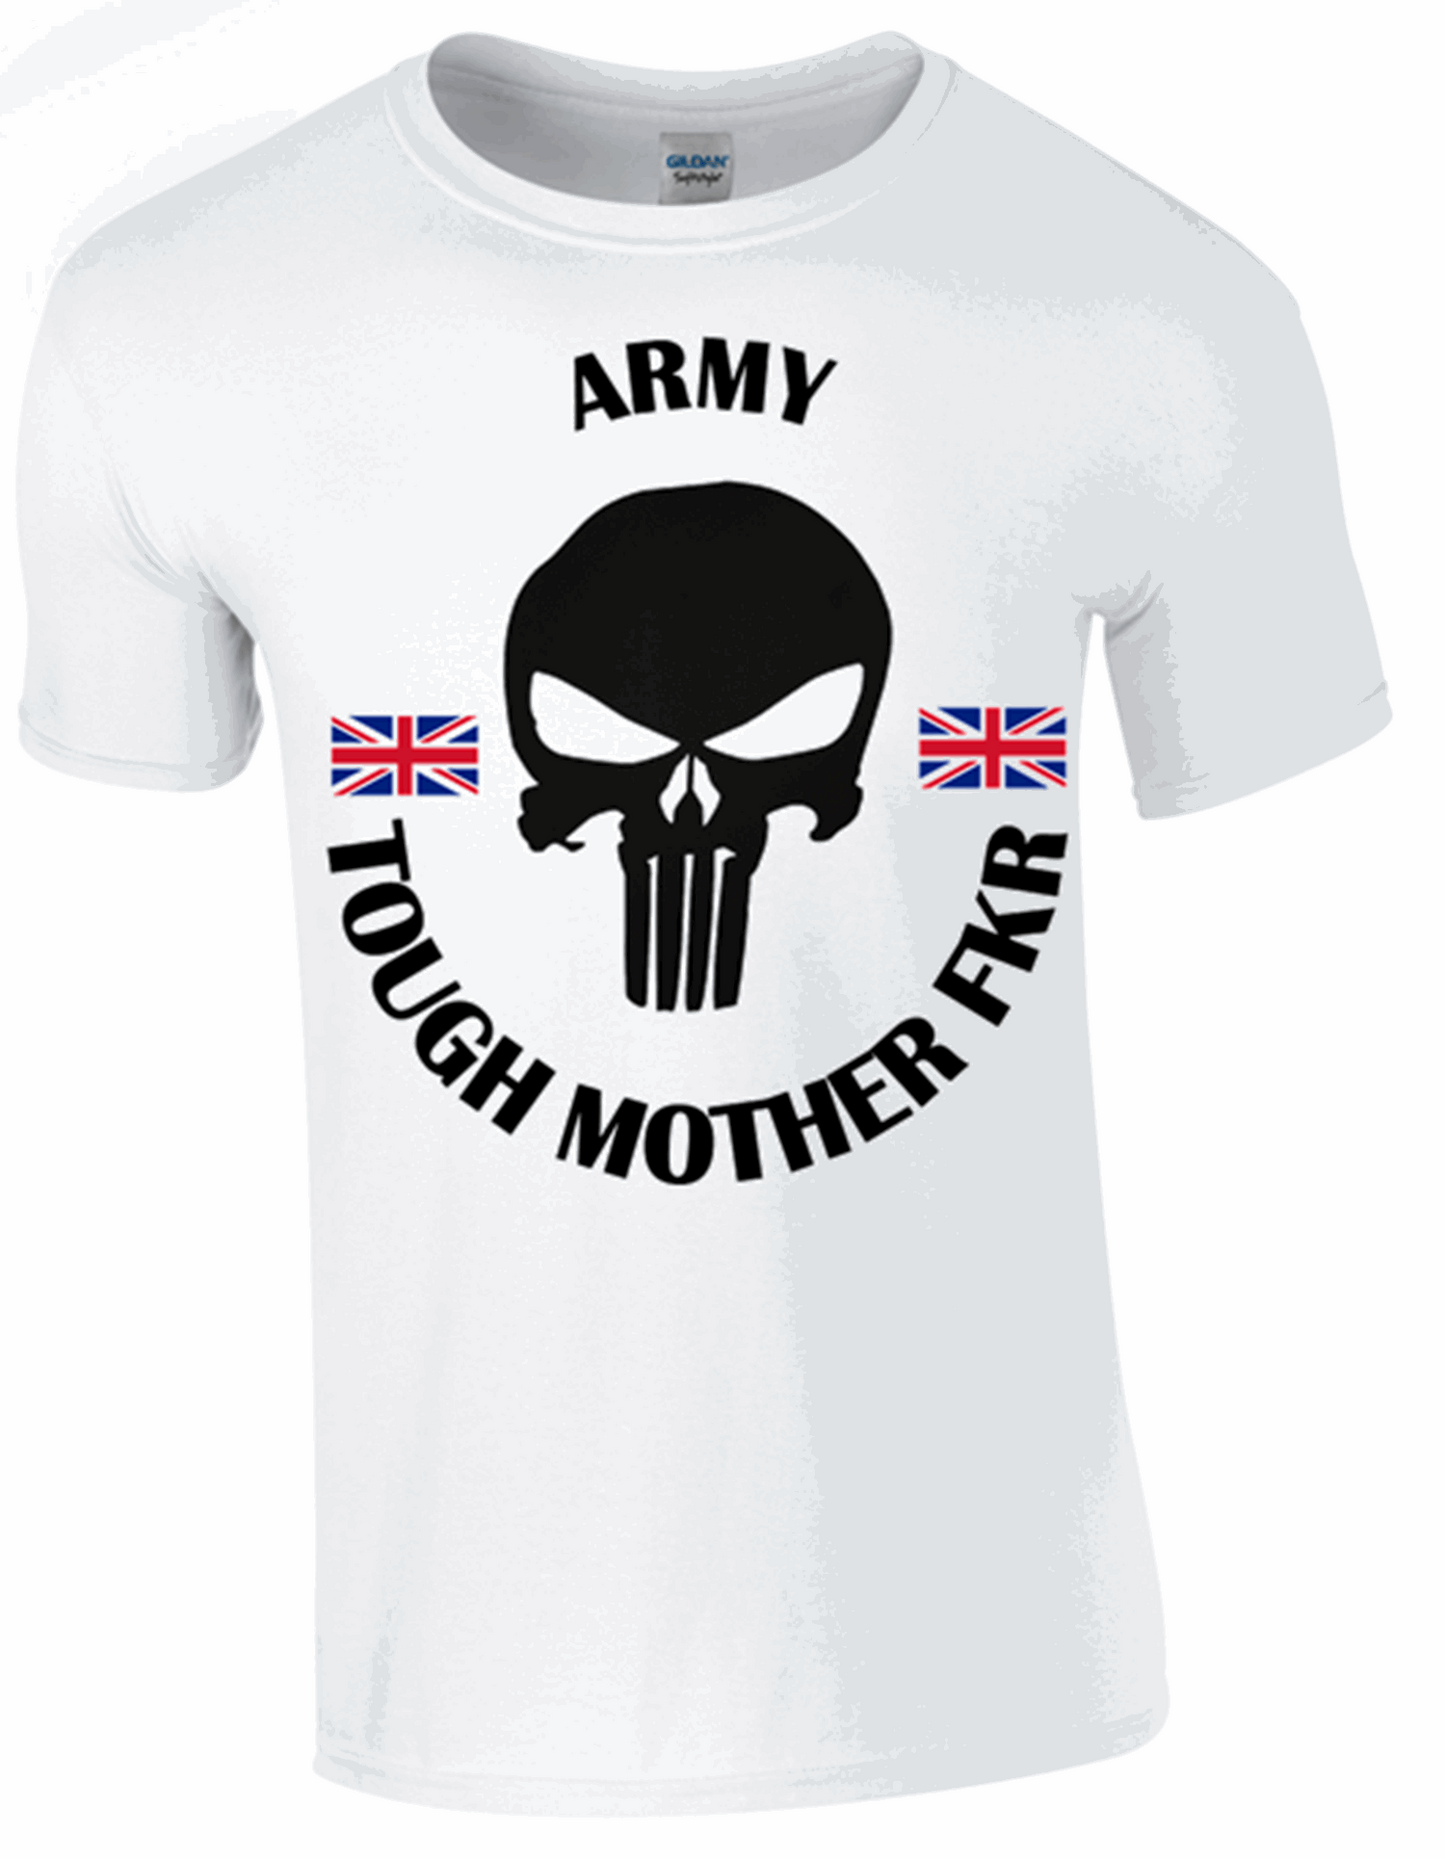 Army Tough Mother FKR T-Shirt - Army 1157 kit White / XXL Army 1157 Kit Veterans Owned Business